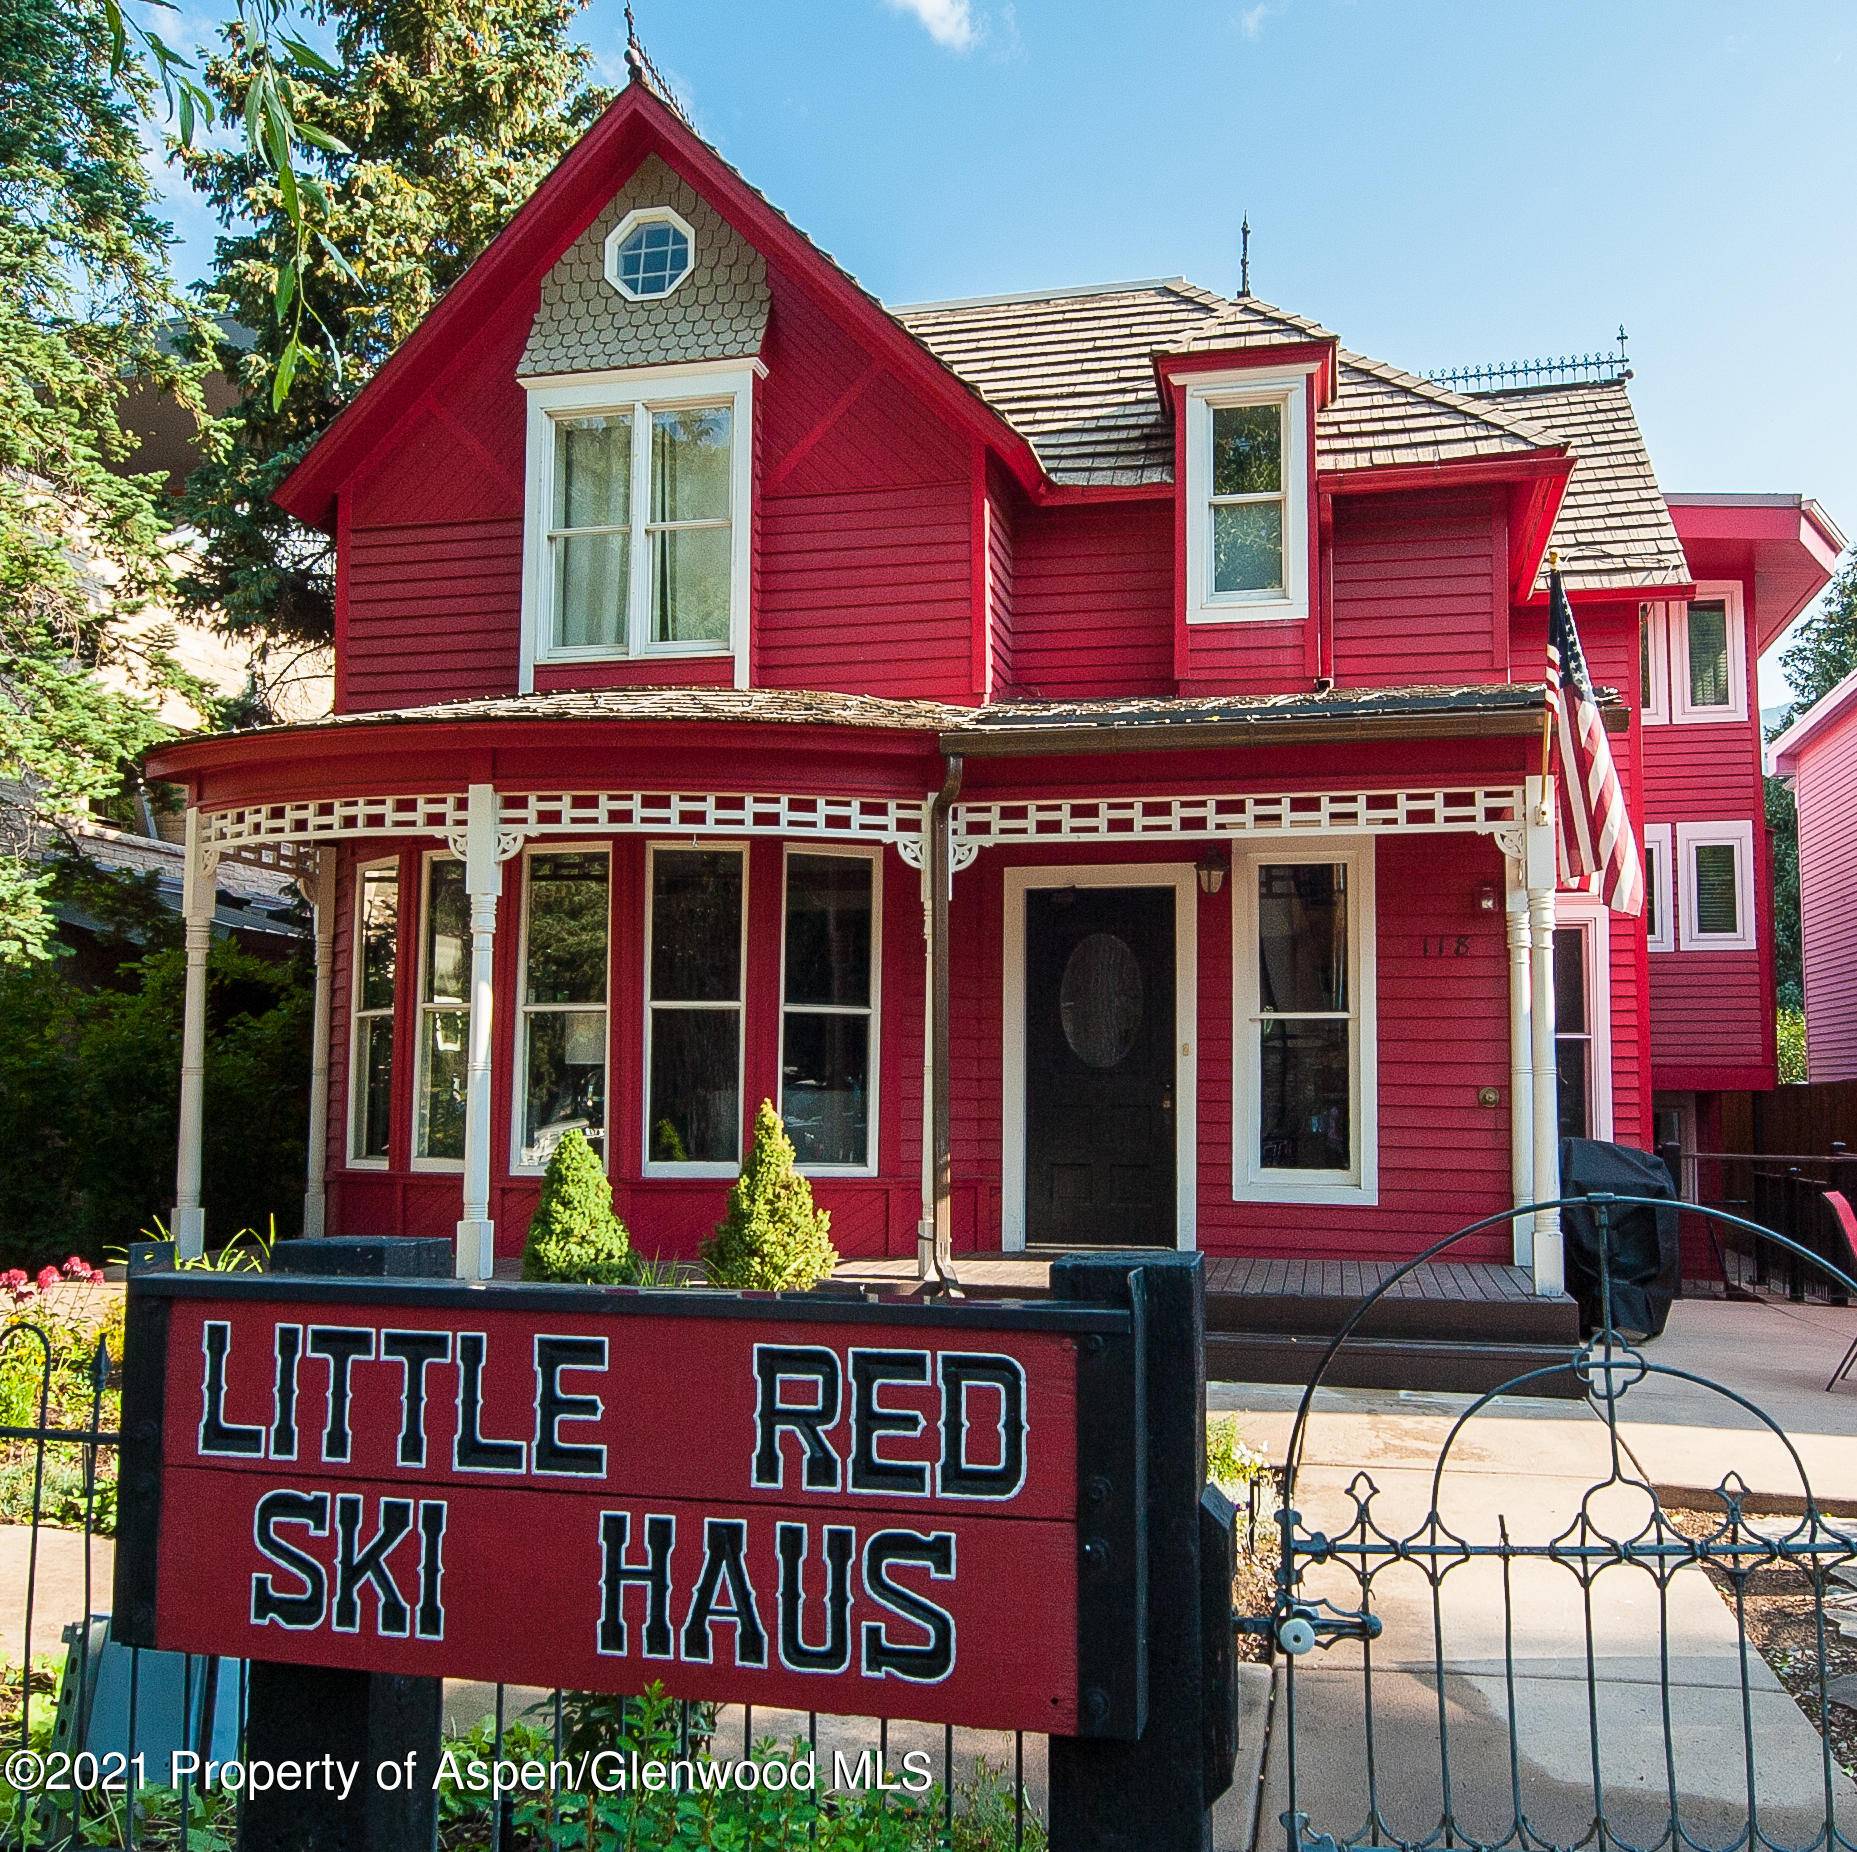 Modern glamour meets Victorian style with The Little Red Ski Haus.